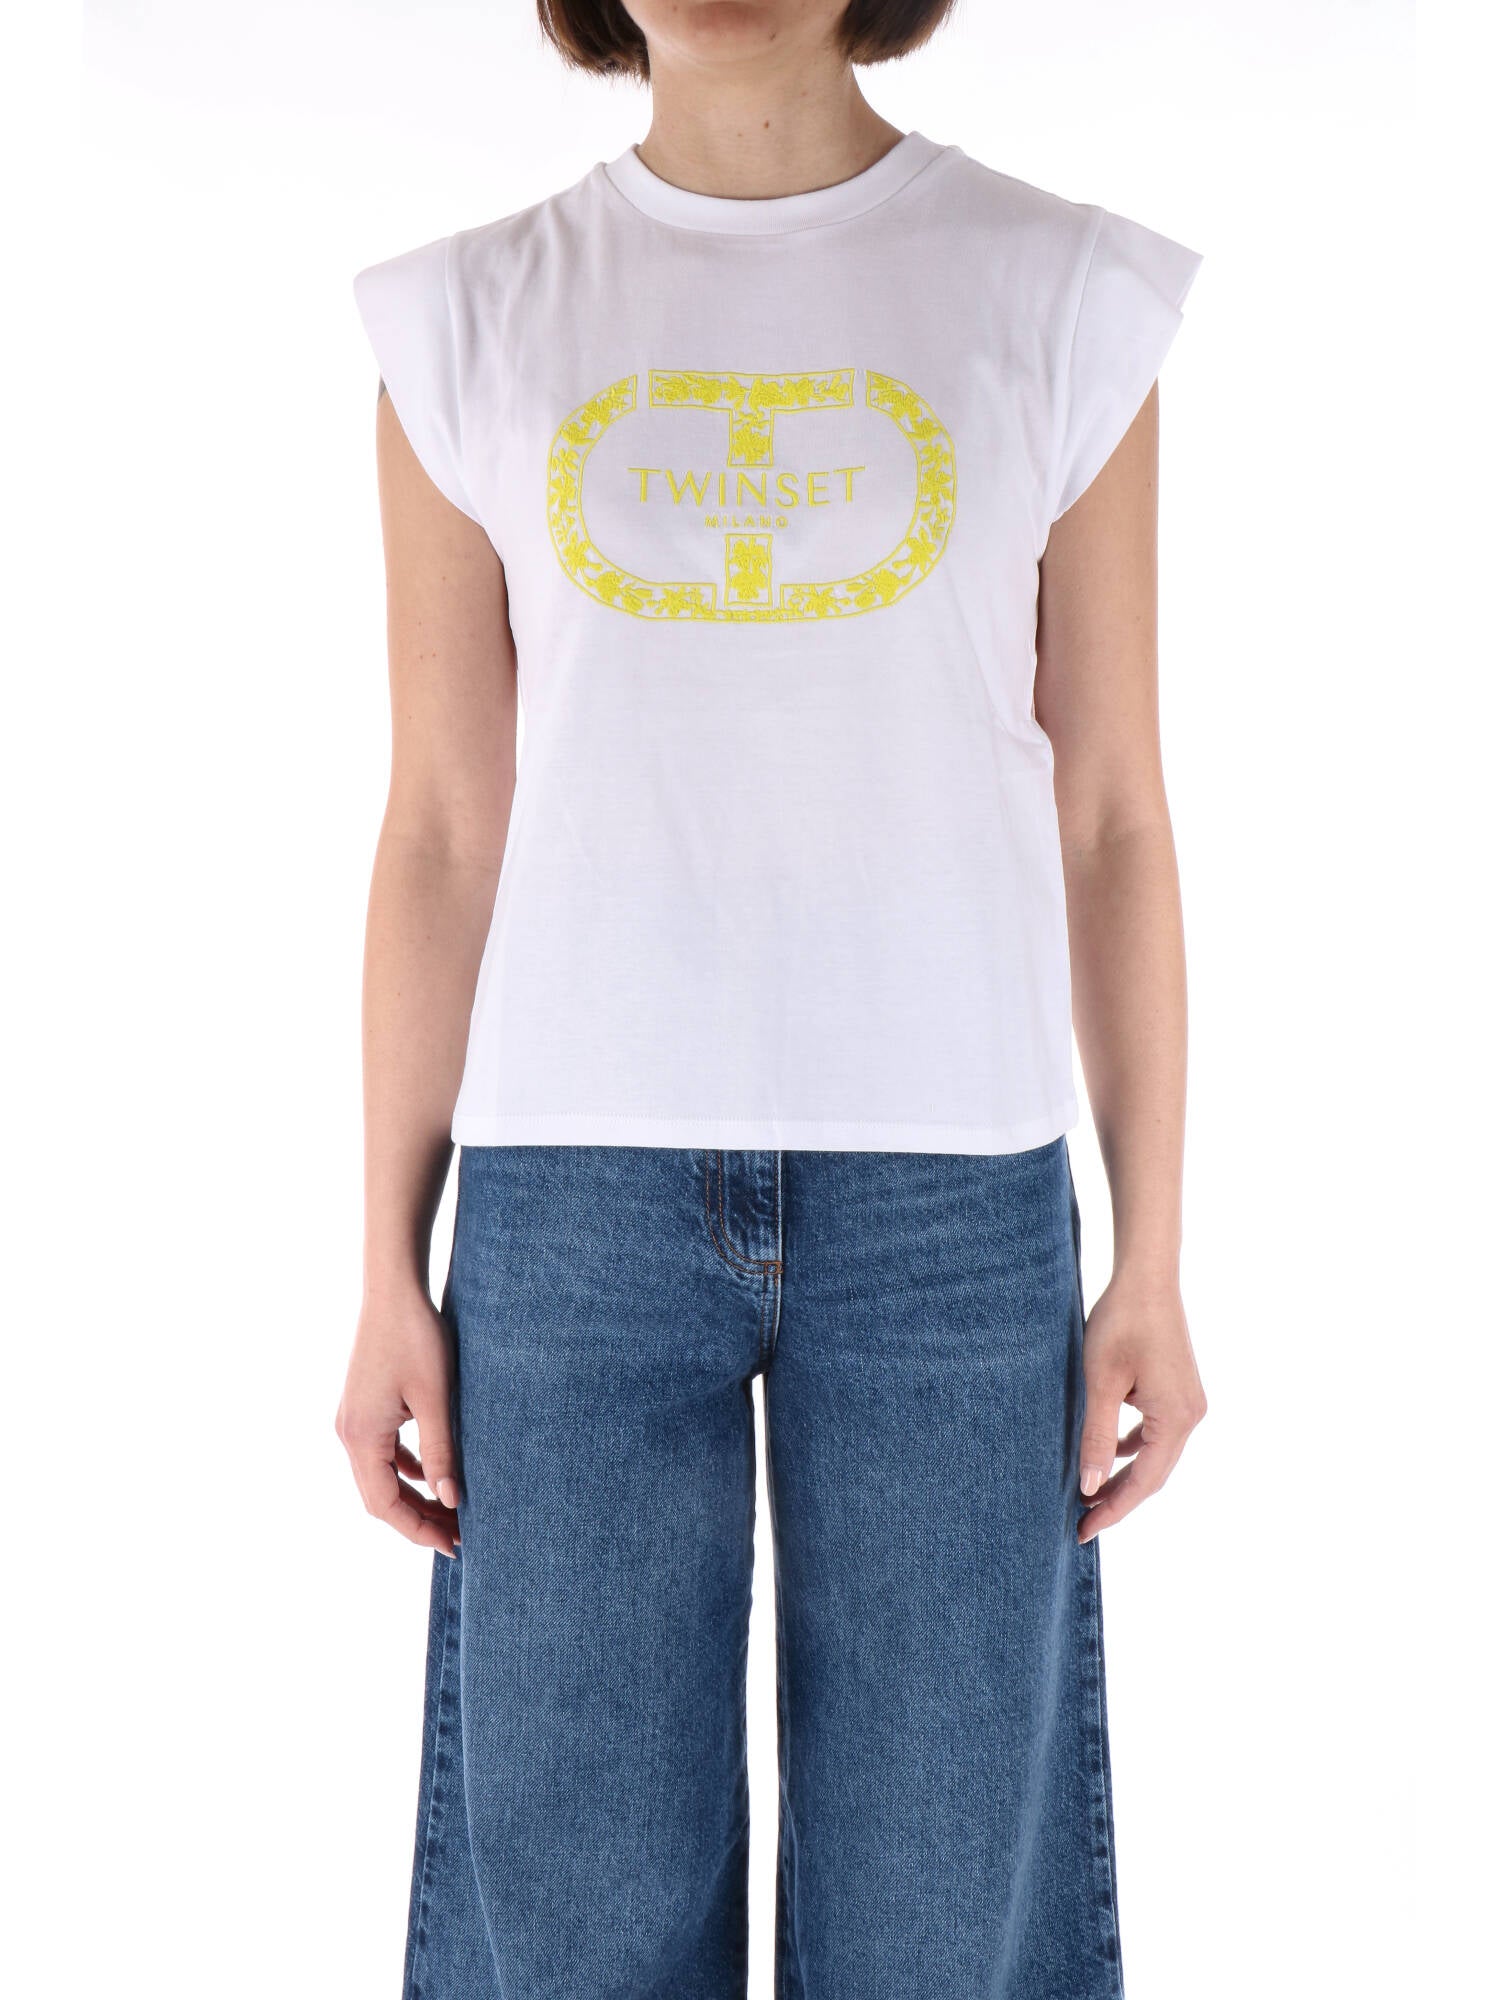 Twinset donna t-shirt con Oval t ricamato